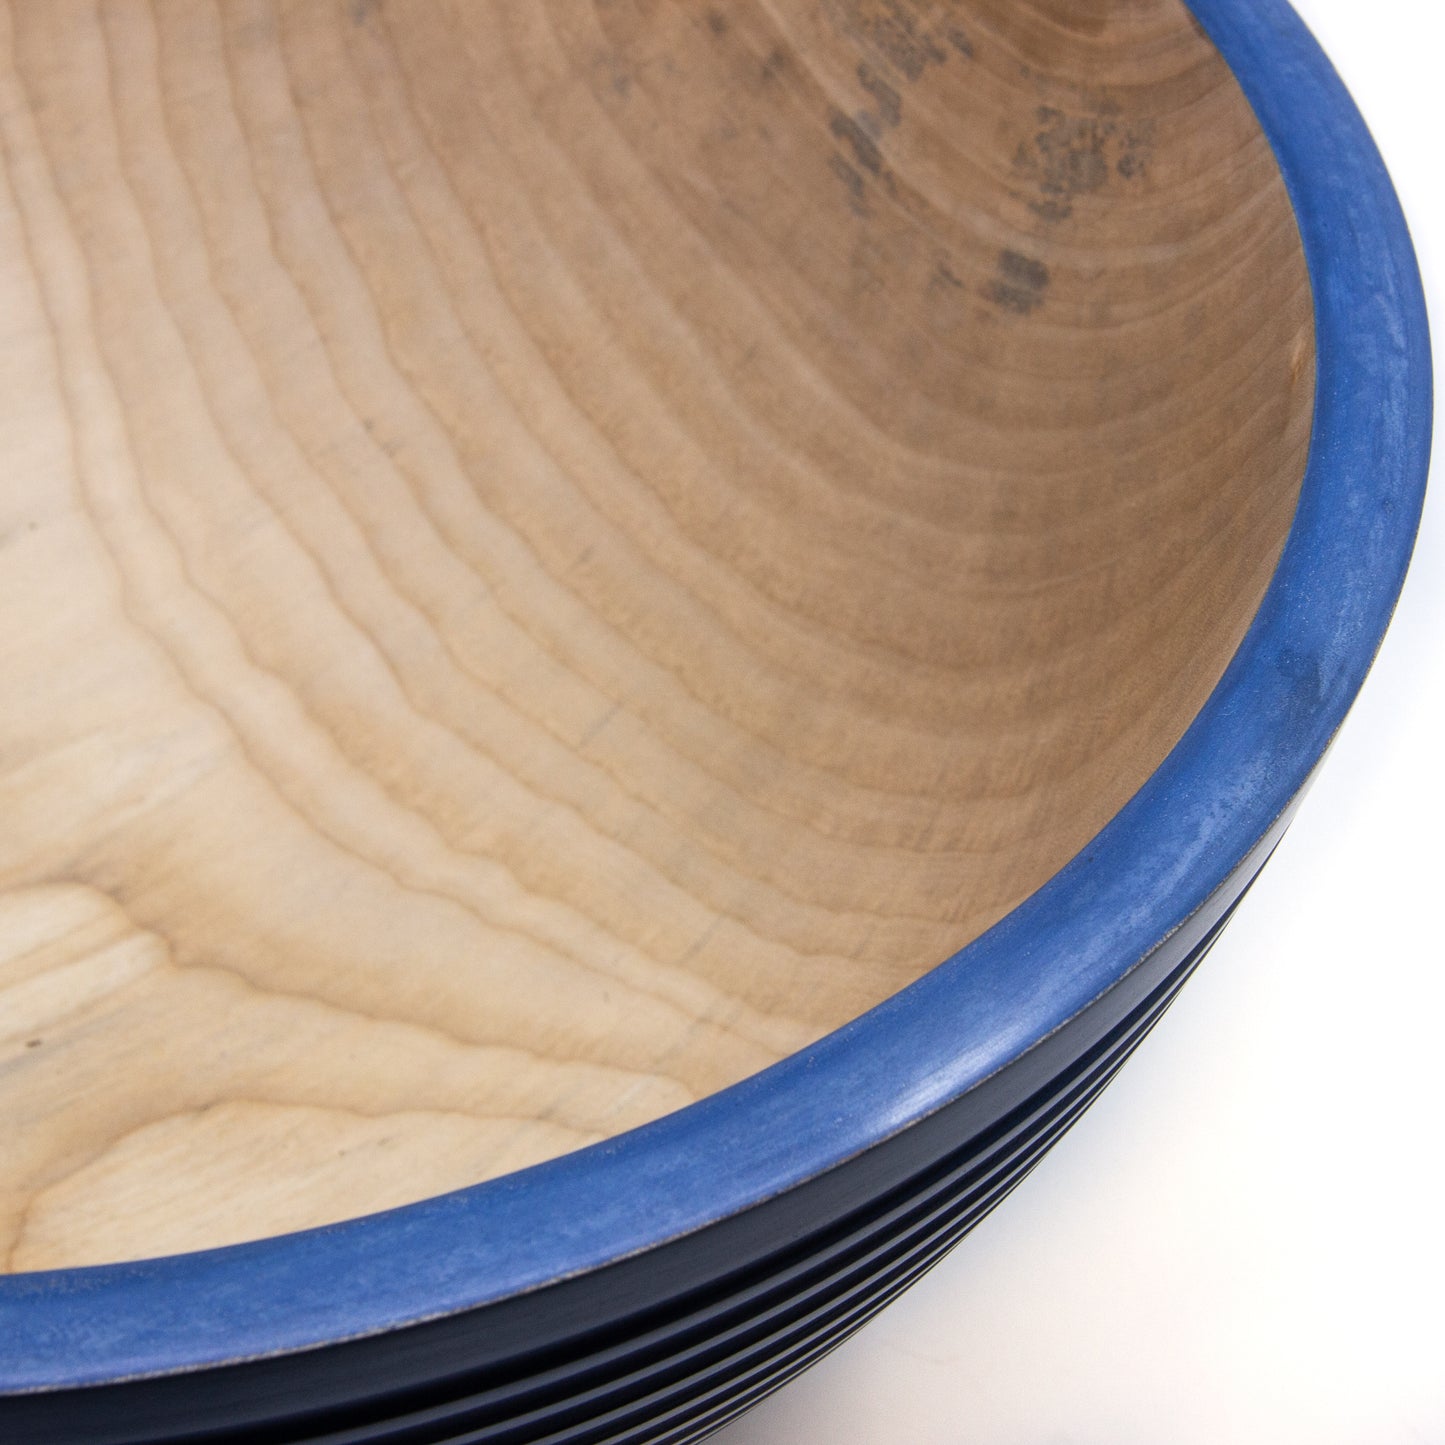 Large Coloured Wooden Bowl